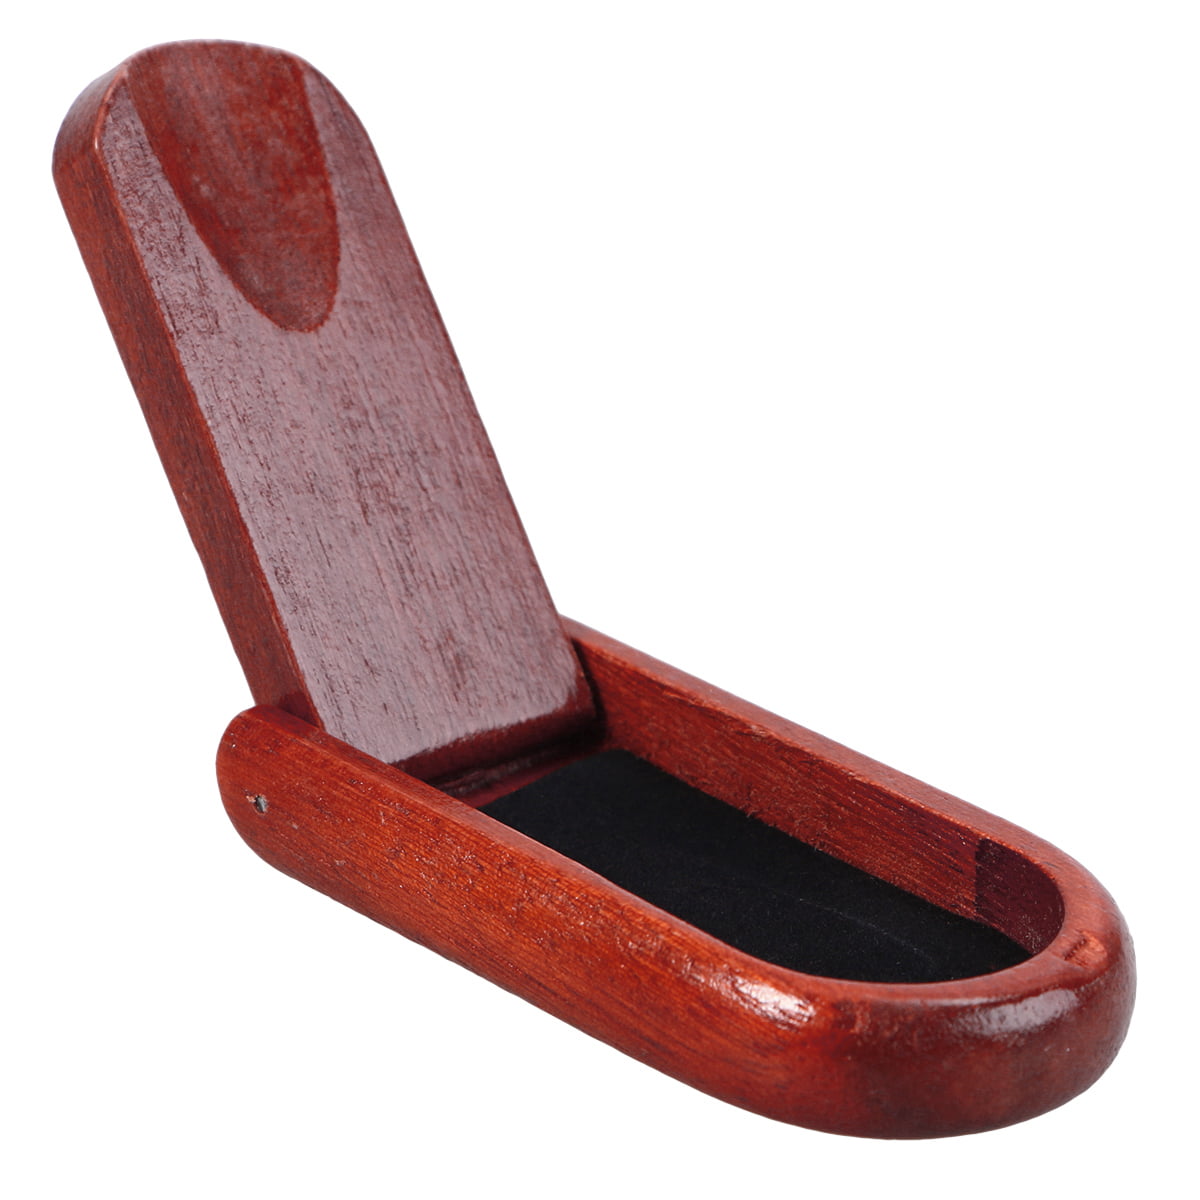 Red Plastic Foldable Stand Tobacco Smoking Pipe Stand Rack Holder Father's Gift 